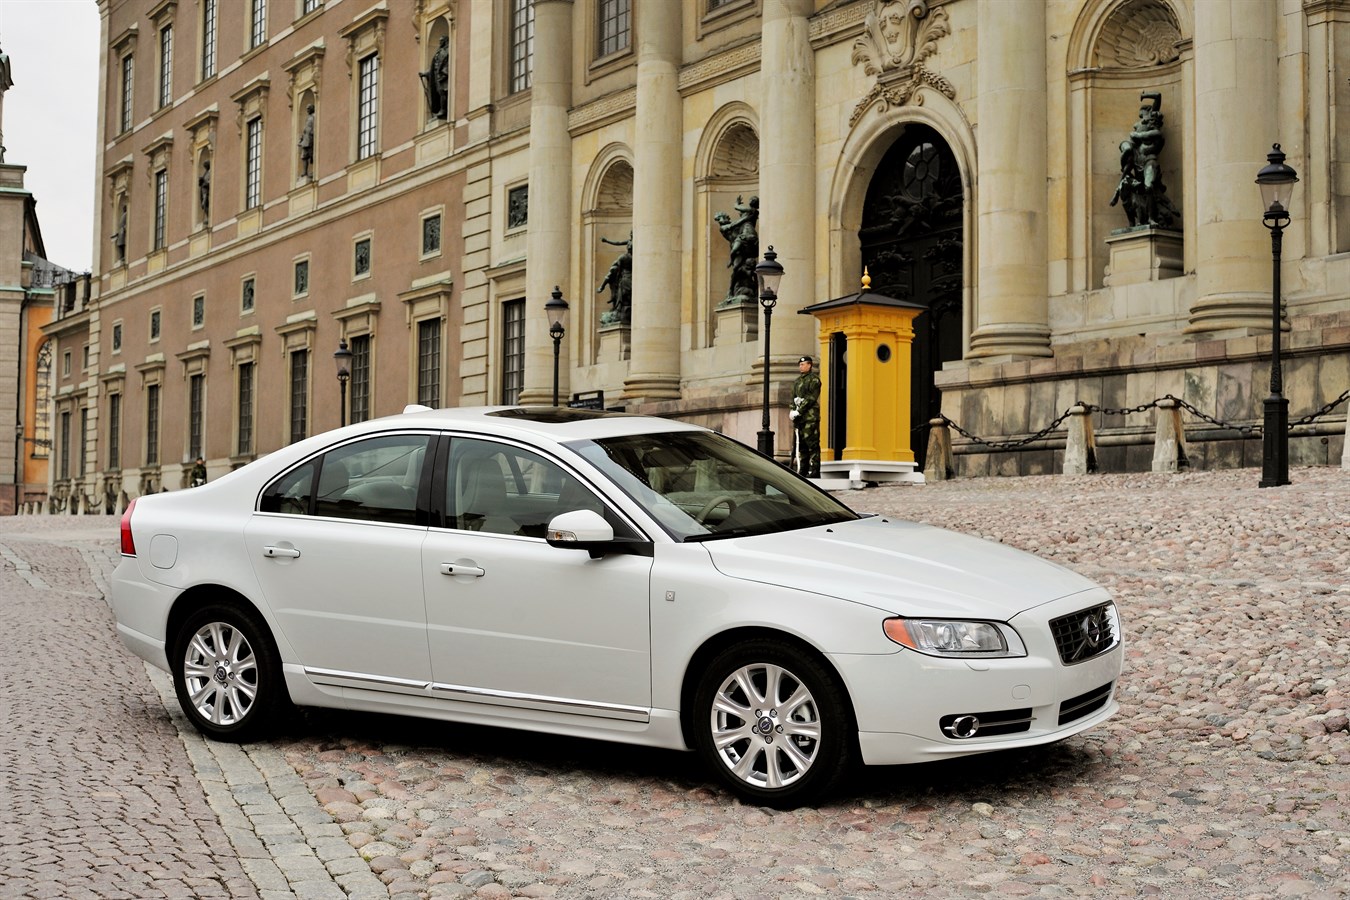 Volvo S80 specially designed for the royal wedding 2010